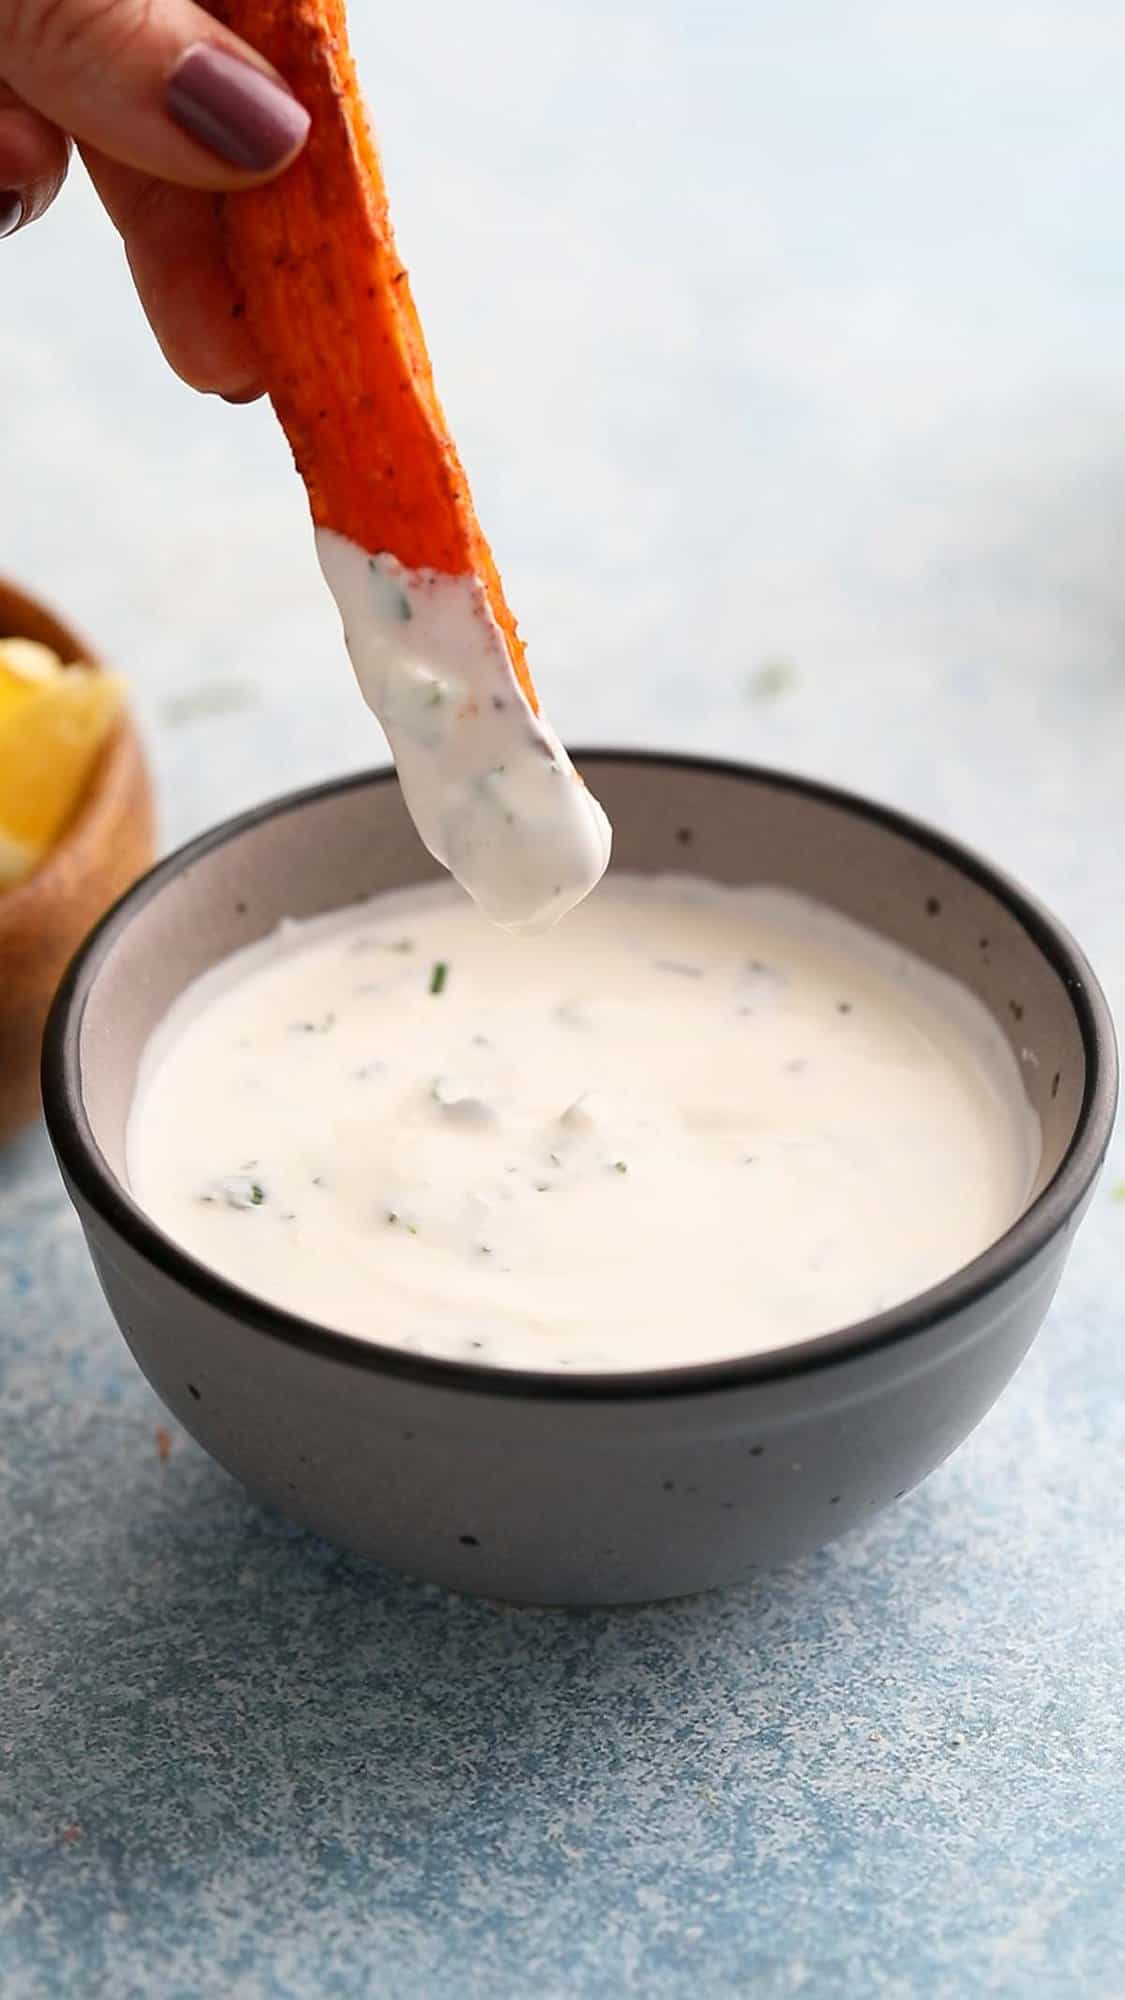 partially dipped carrot fry in white yogurt sauce.